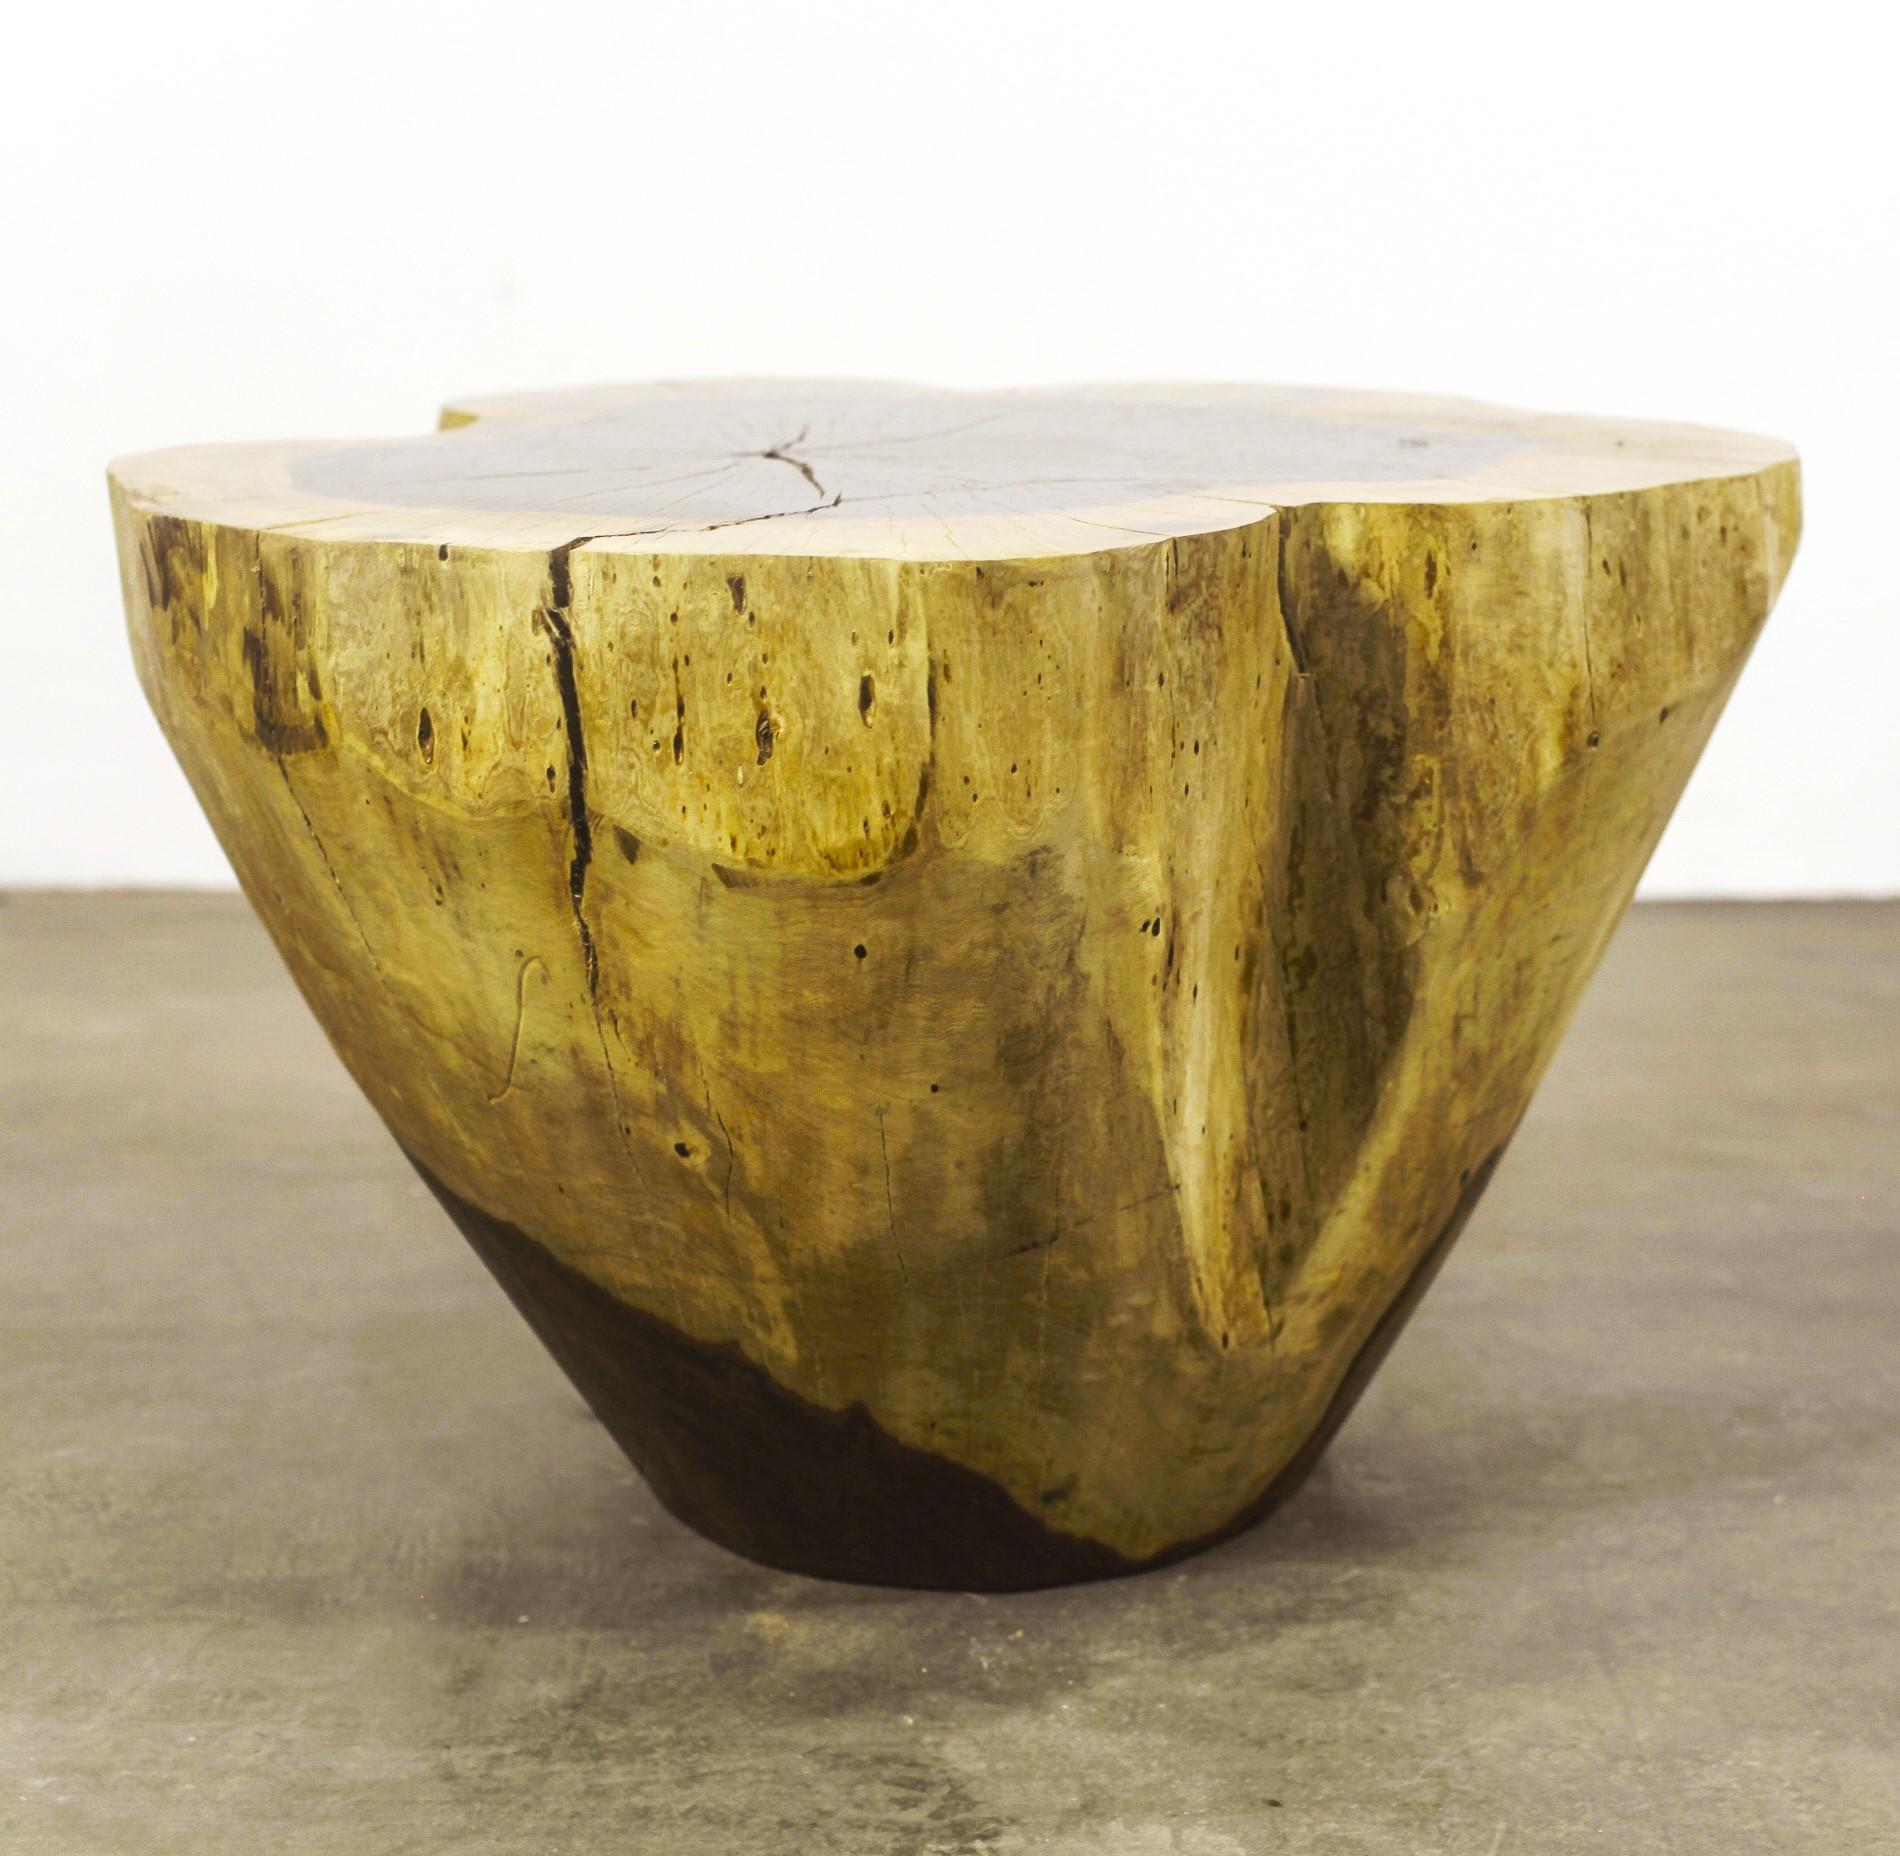 Francisco hand carved live edge solid wood trunk table ƒ3 by Costantini, in Stock

Measurements are 29.5